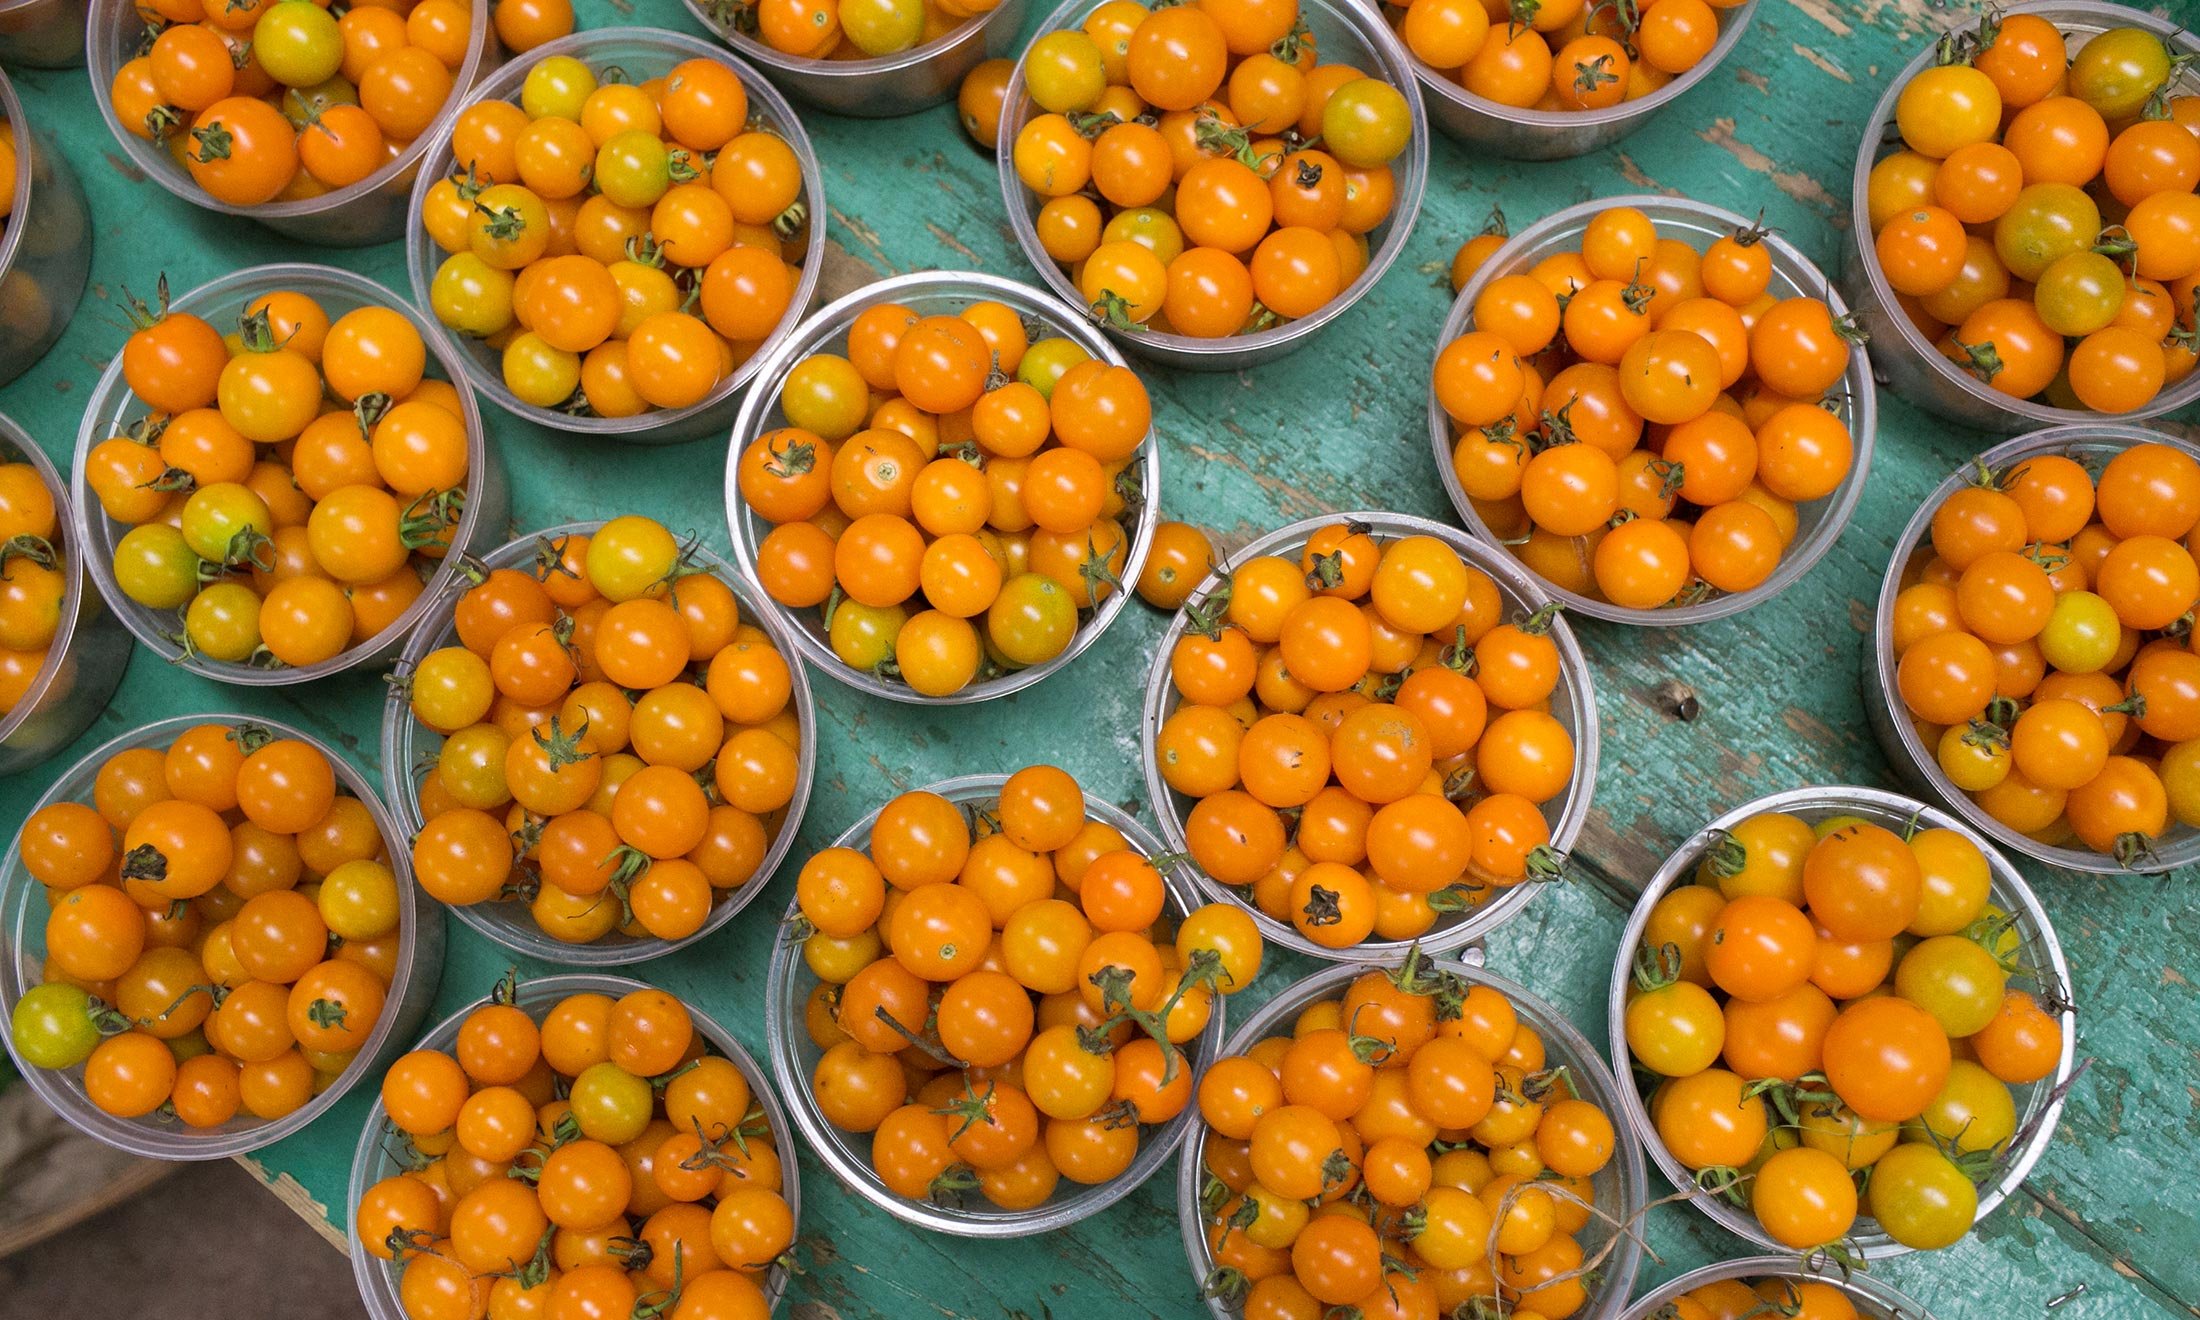 Yellow cherry tomatoes in bowls available for purchase at the Royal Oak Farmers Market